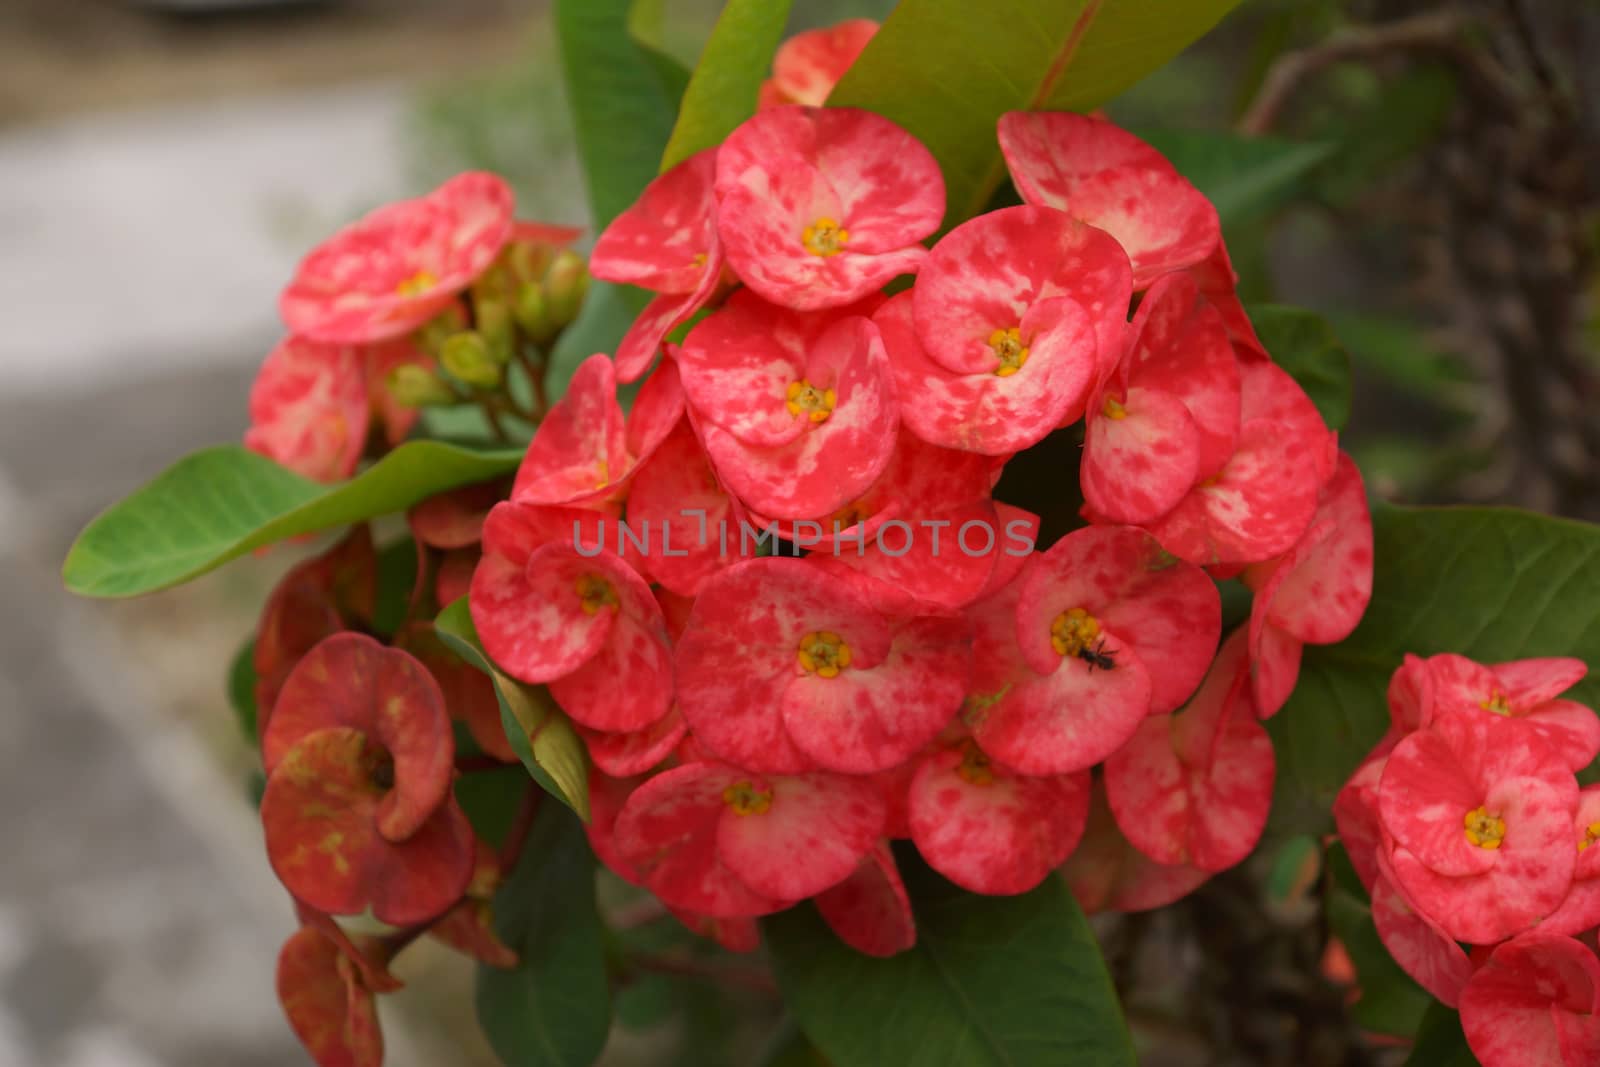 Tree to the prosperity of the Chinese people. Crown of thorns flower. (Euphorbia milli Desmoul)